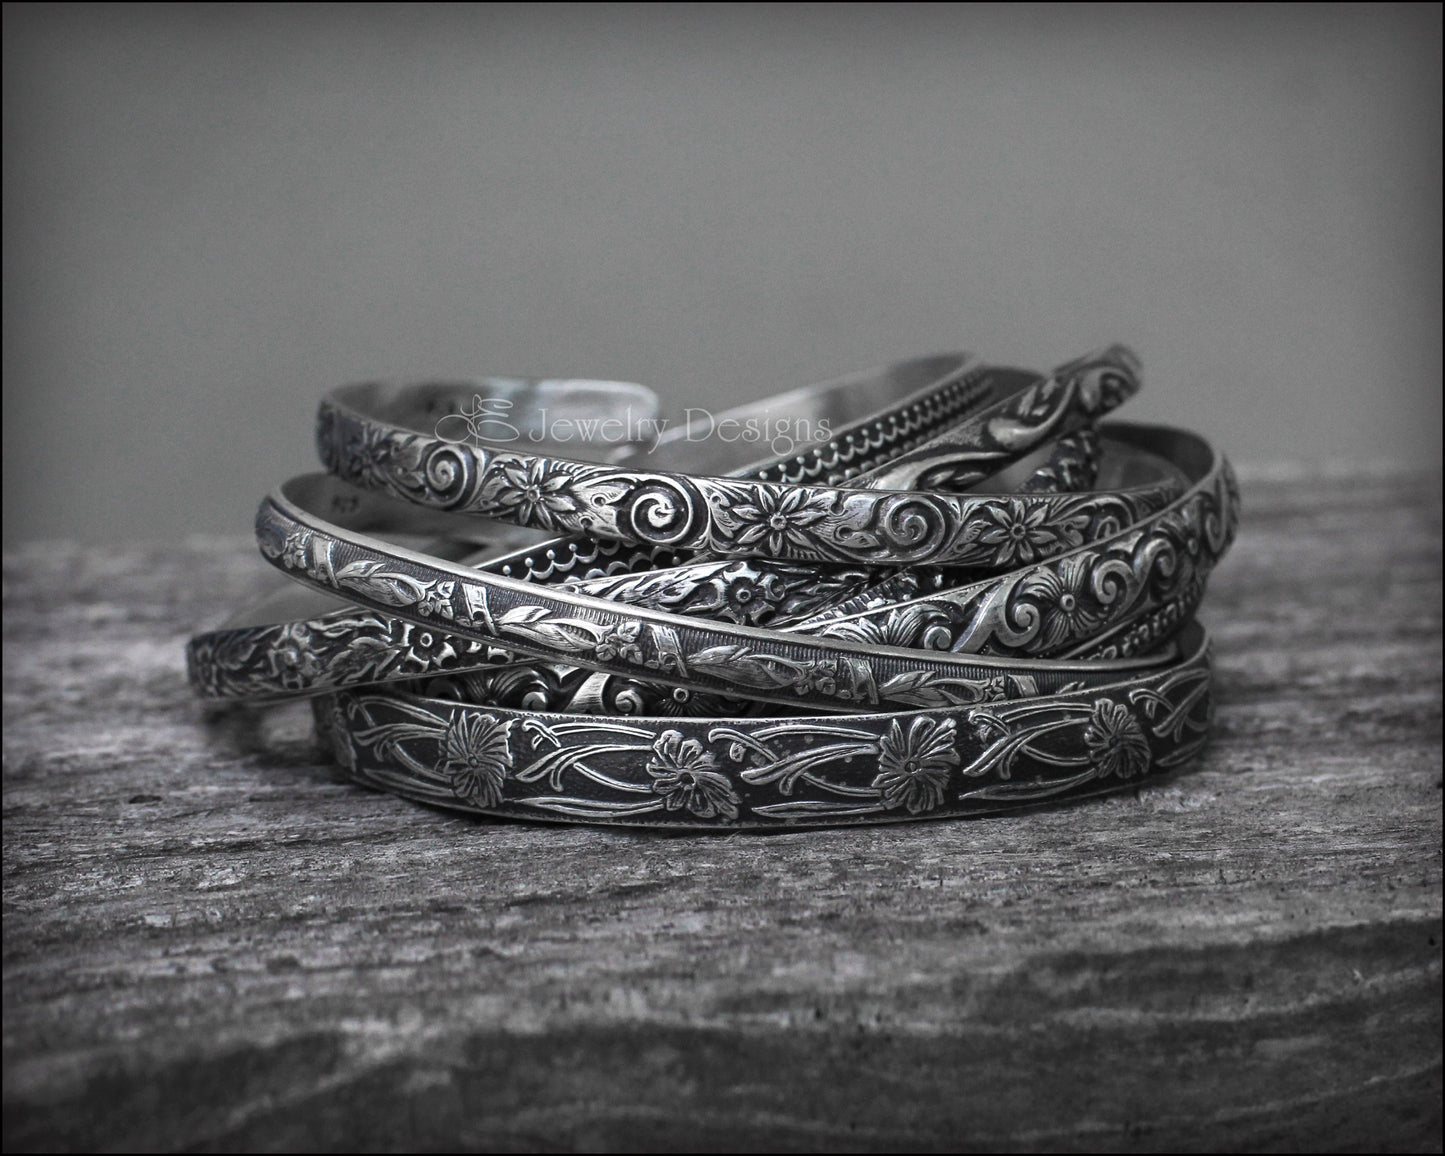 Load image into Gallery viewer, Sterling Silver Pattern Cuff Bracelets - LE Jewelry Designs
